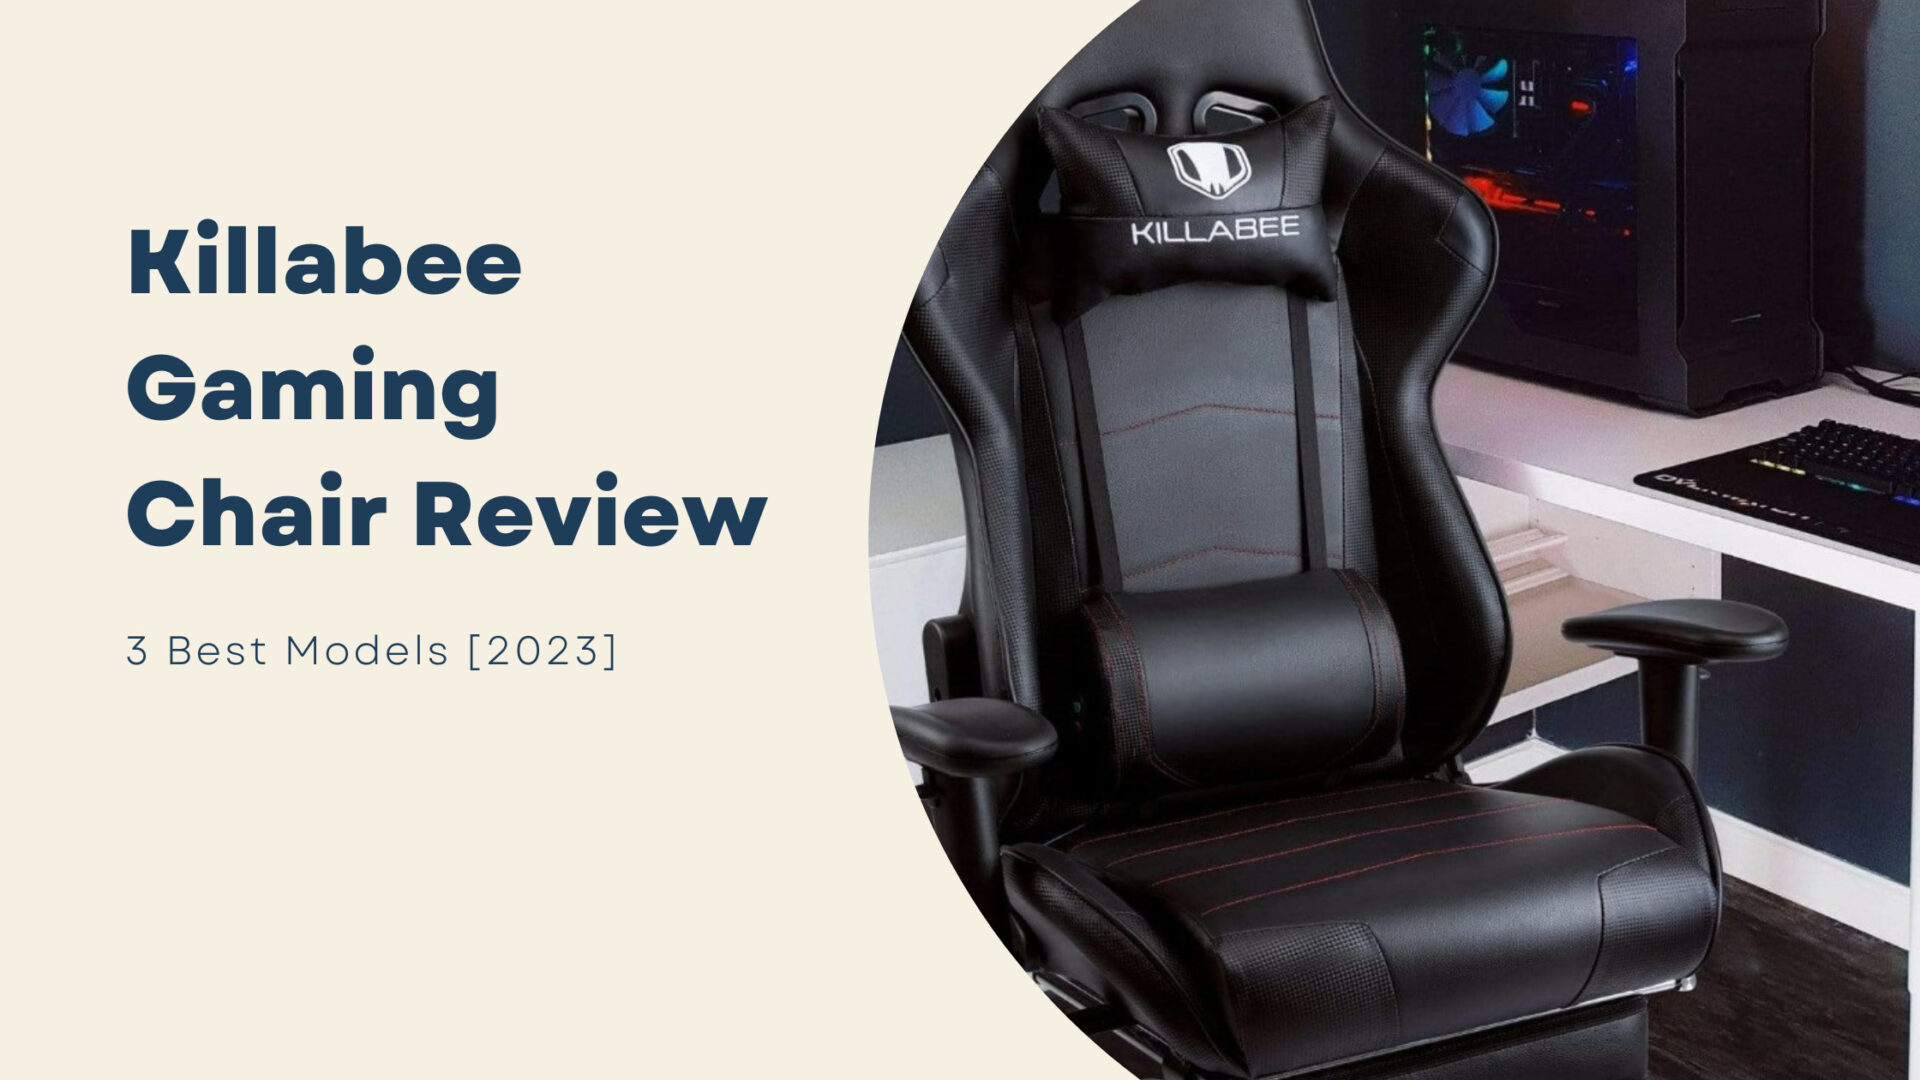 Killabee Gaming Chair Review